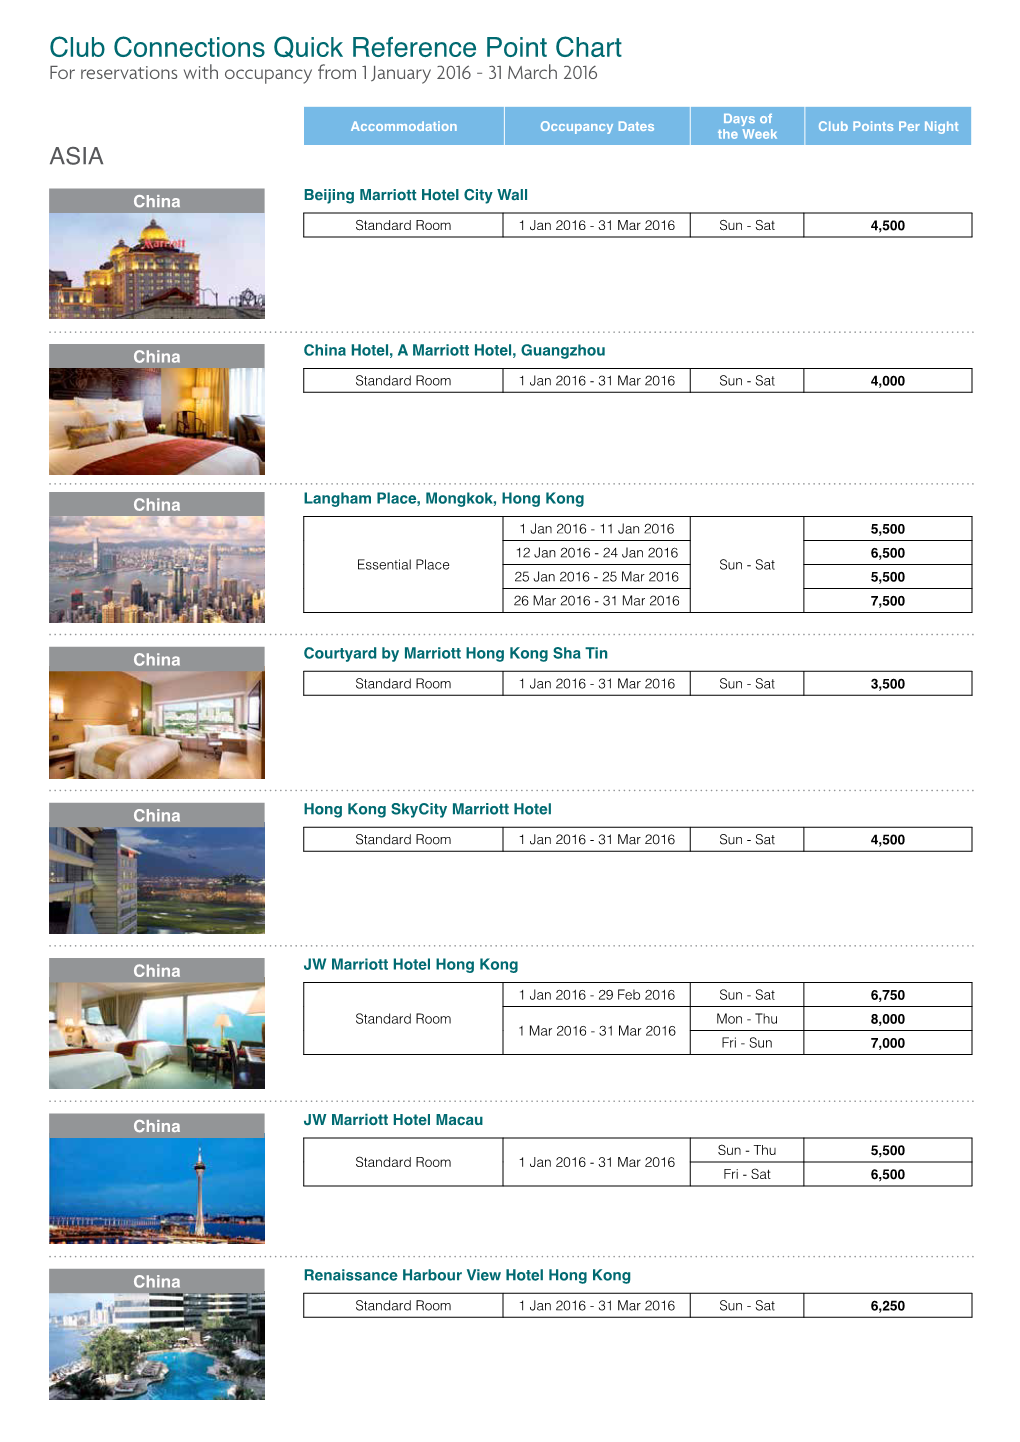 Club Connections Quick Reference Point Chart for Reservations with Occupancy from 1 January 2016 - 31 March 2016